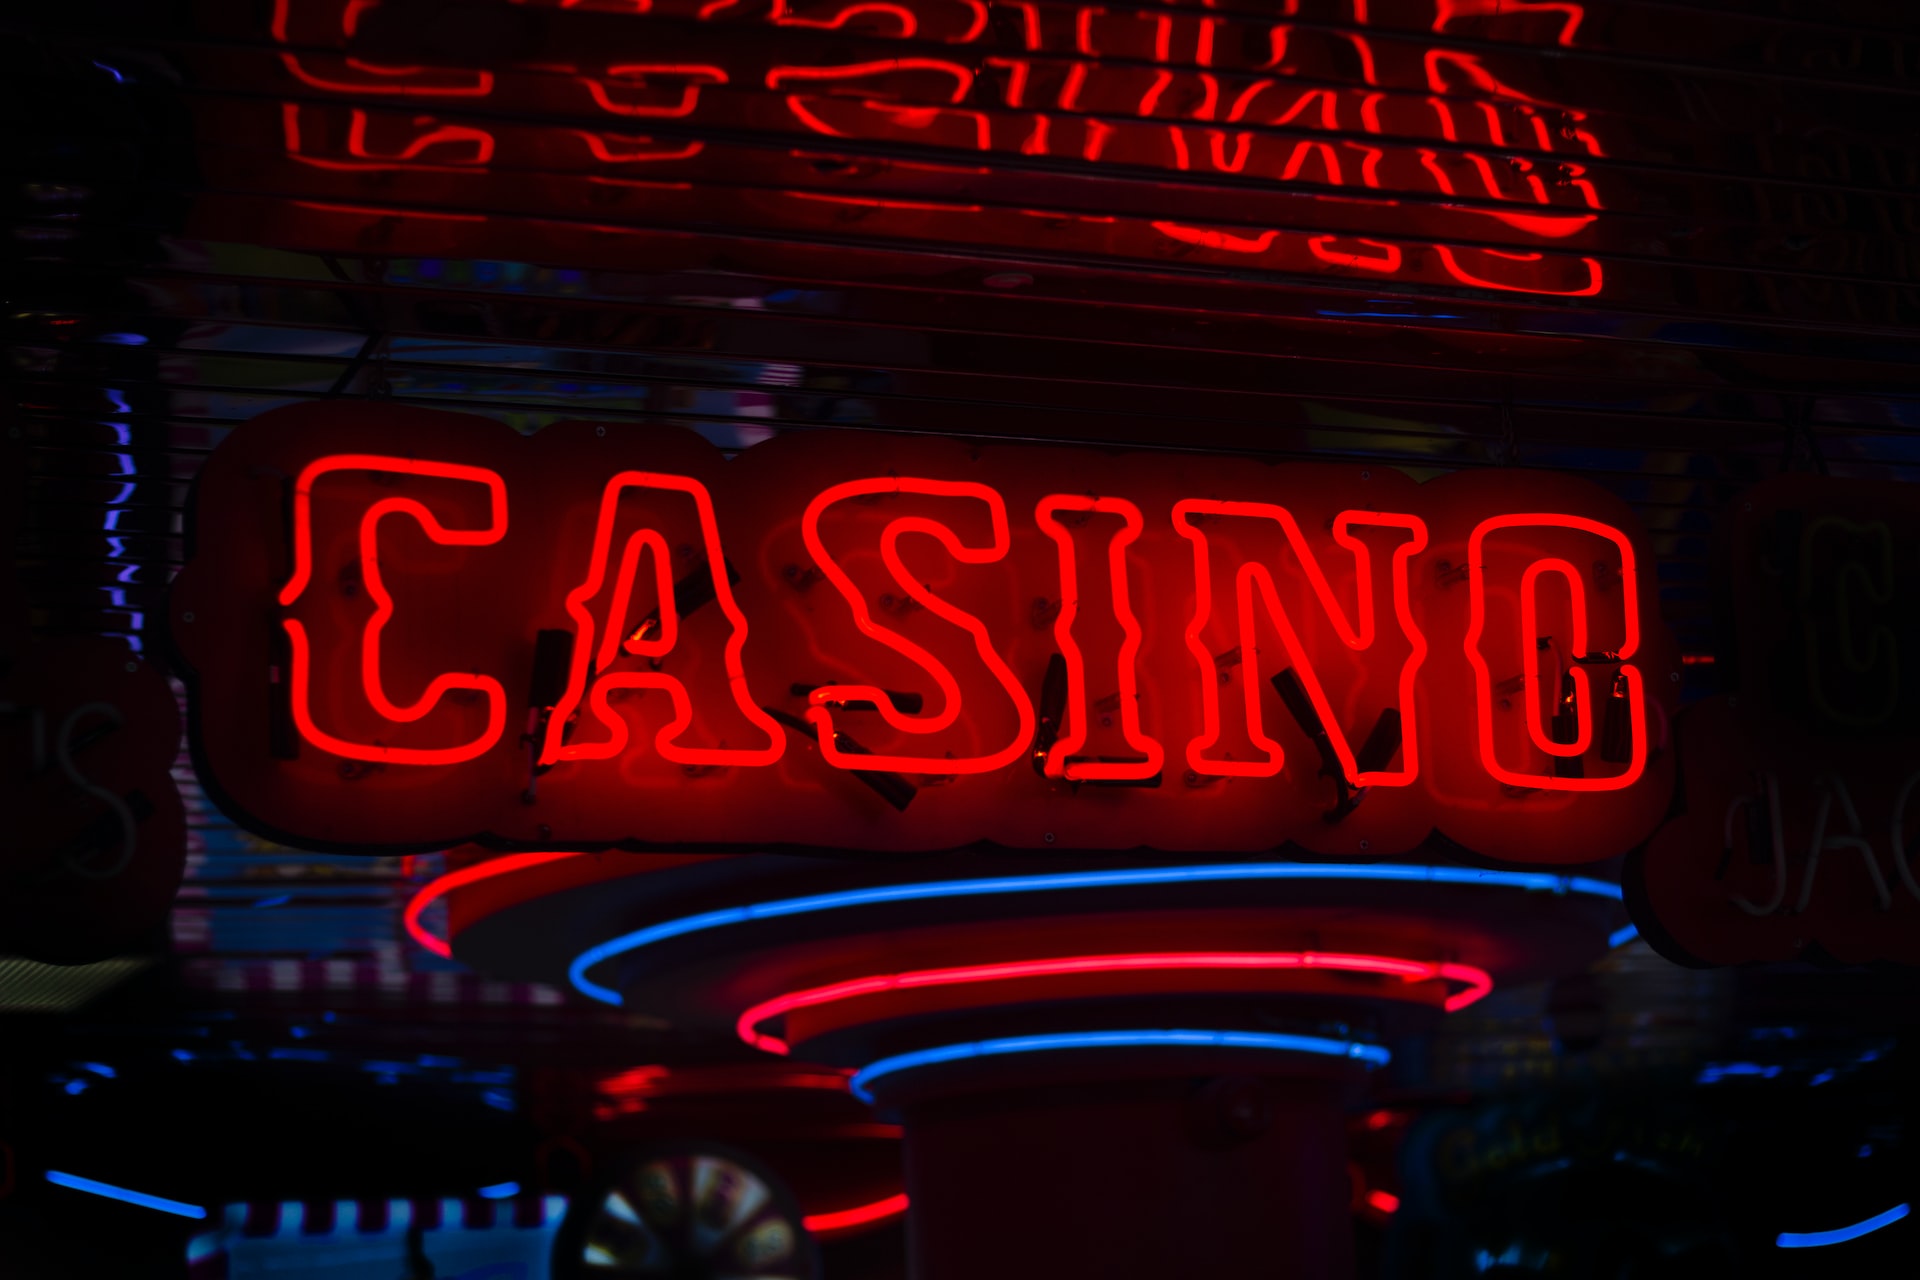 casino gaming defined and explained